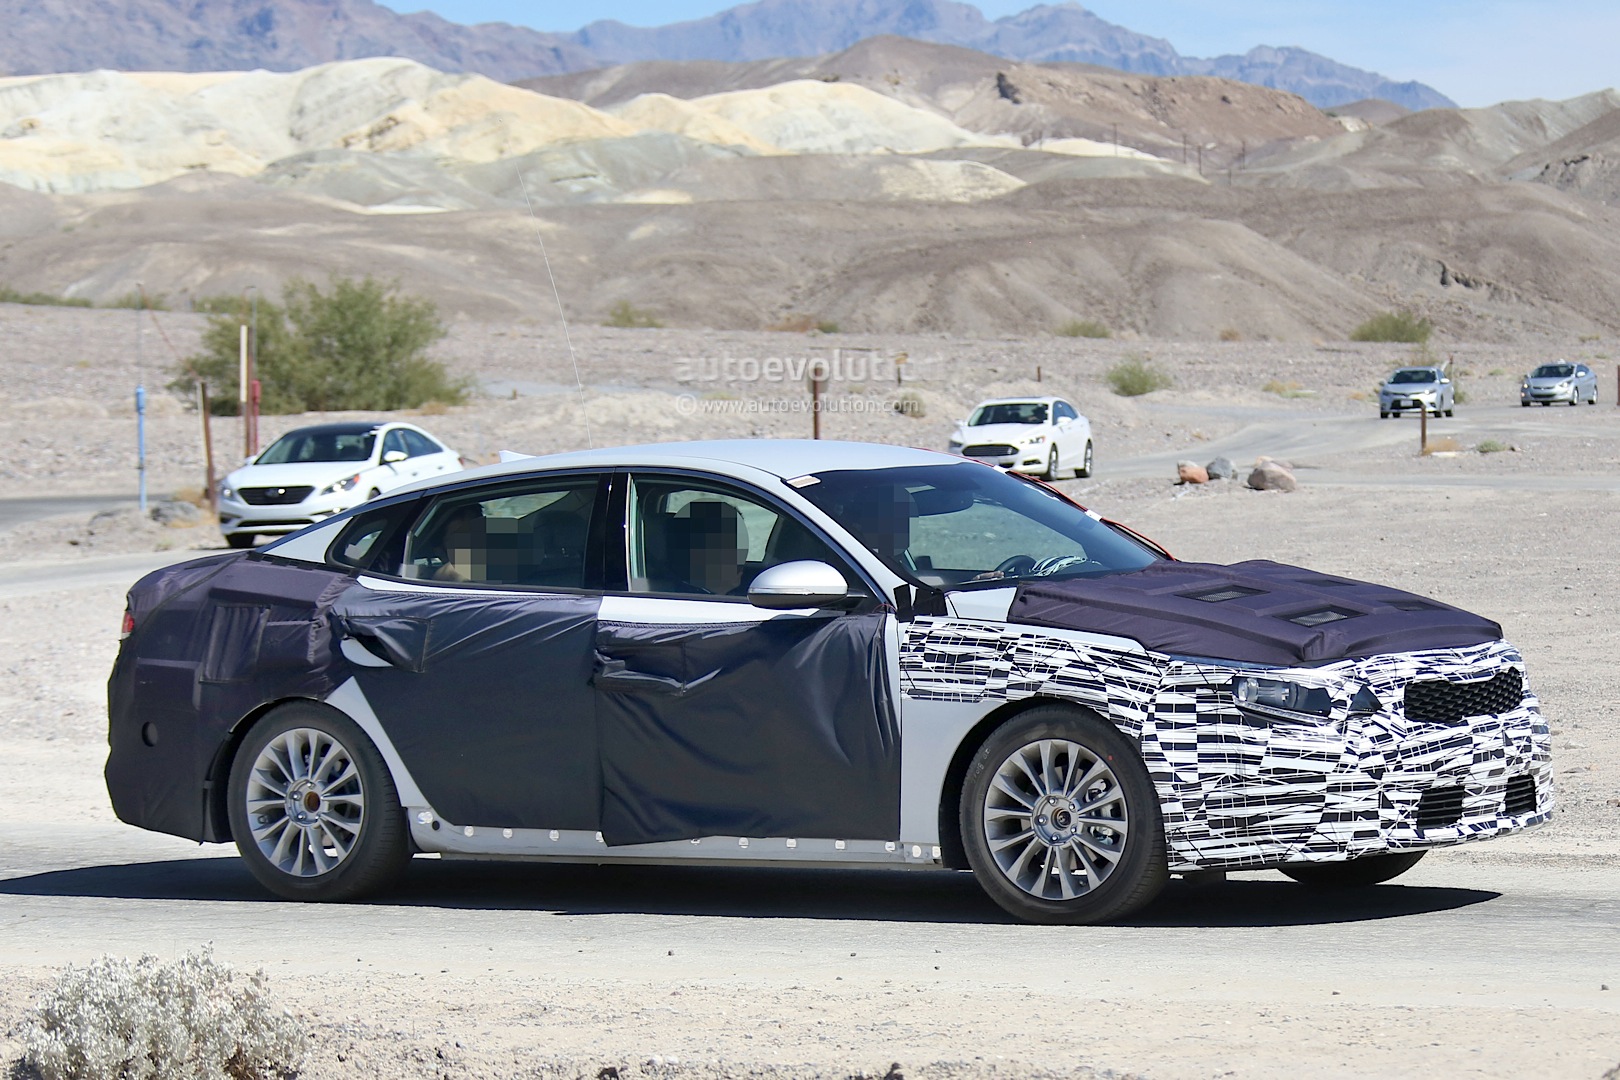 all-new-2016-kia-optima-spied-for-the-first-time-including-the-interior_14